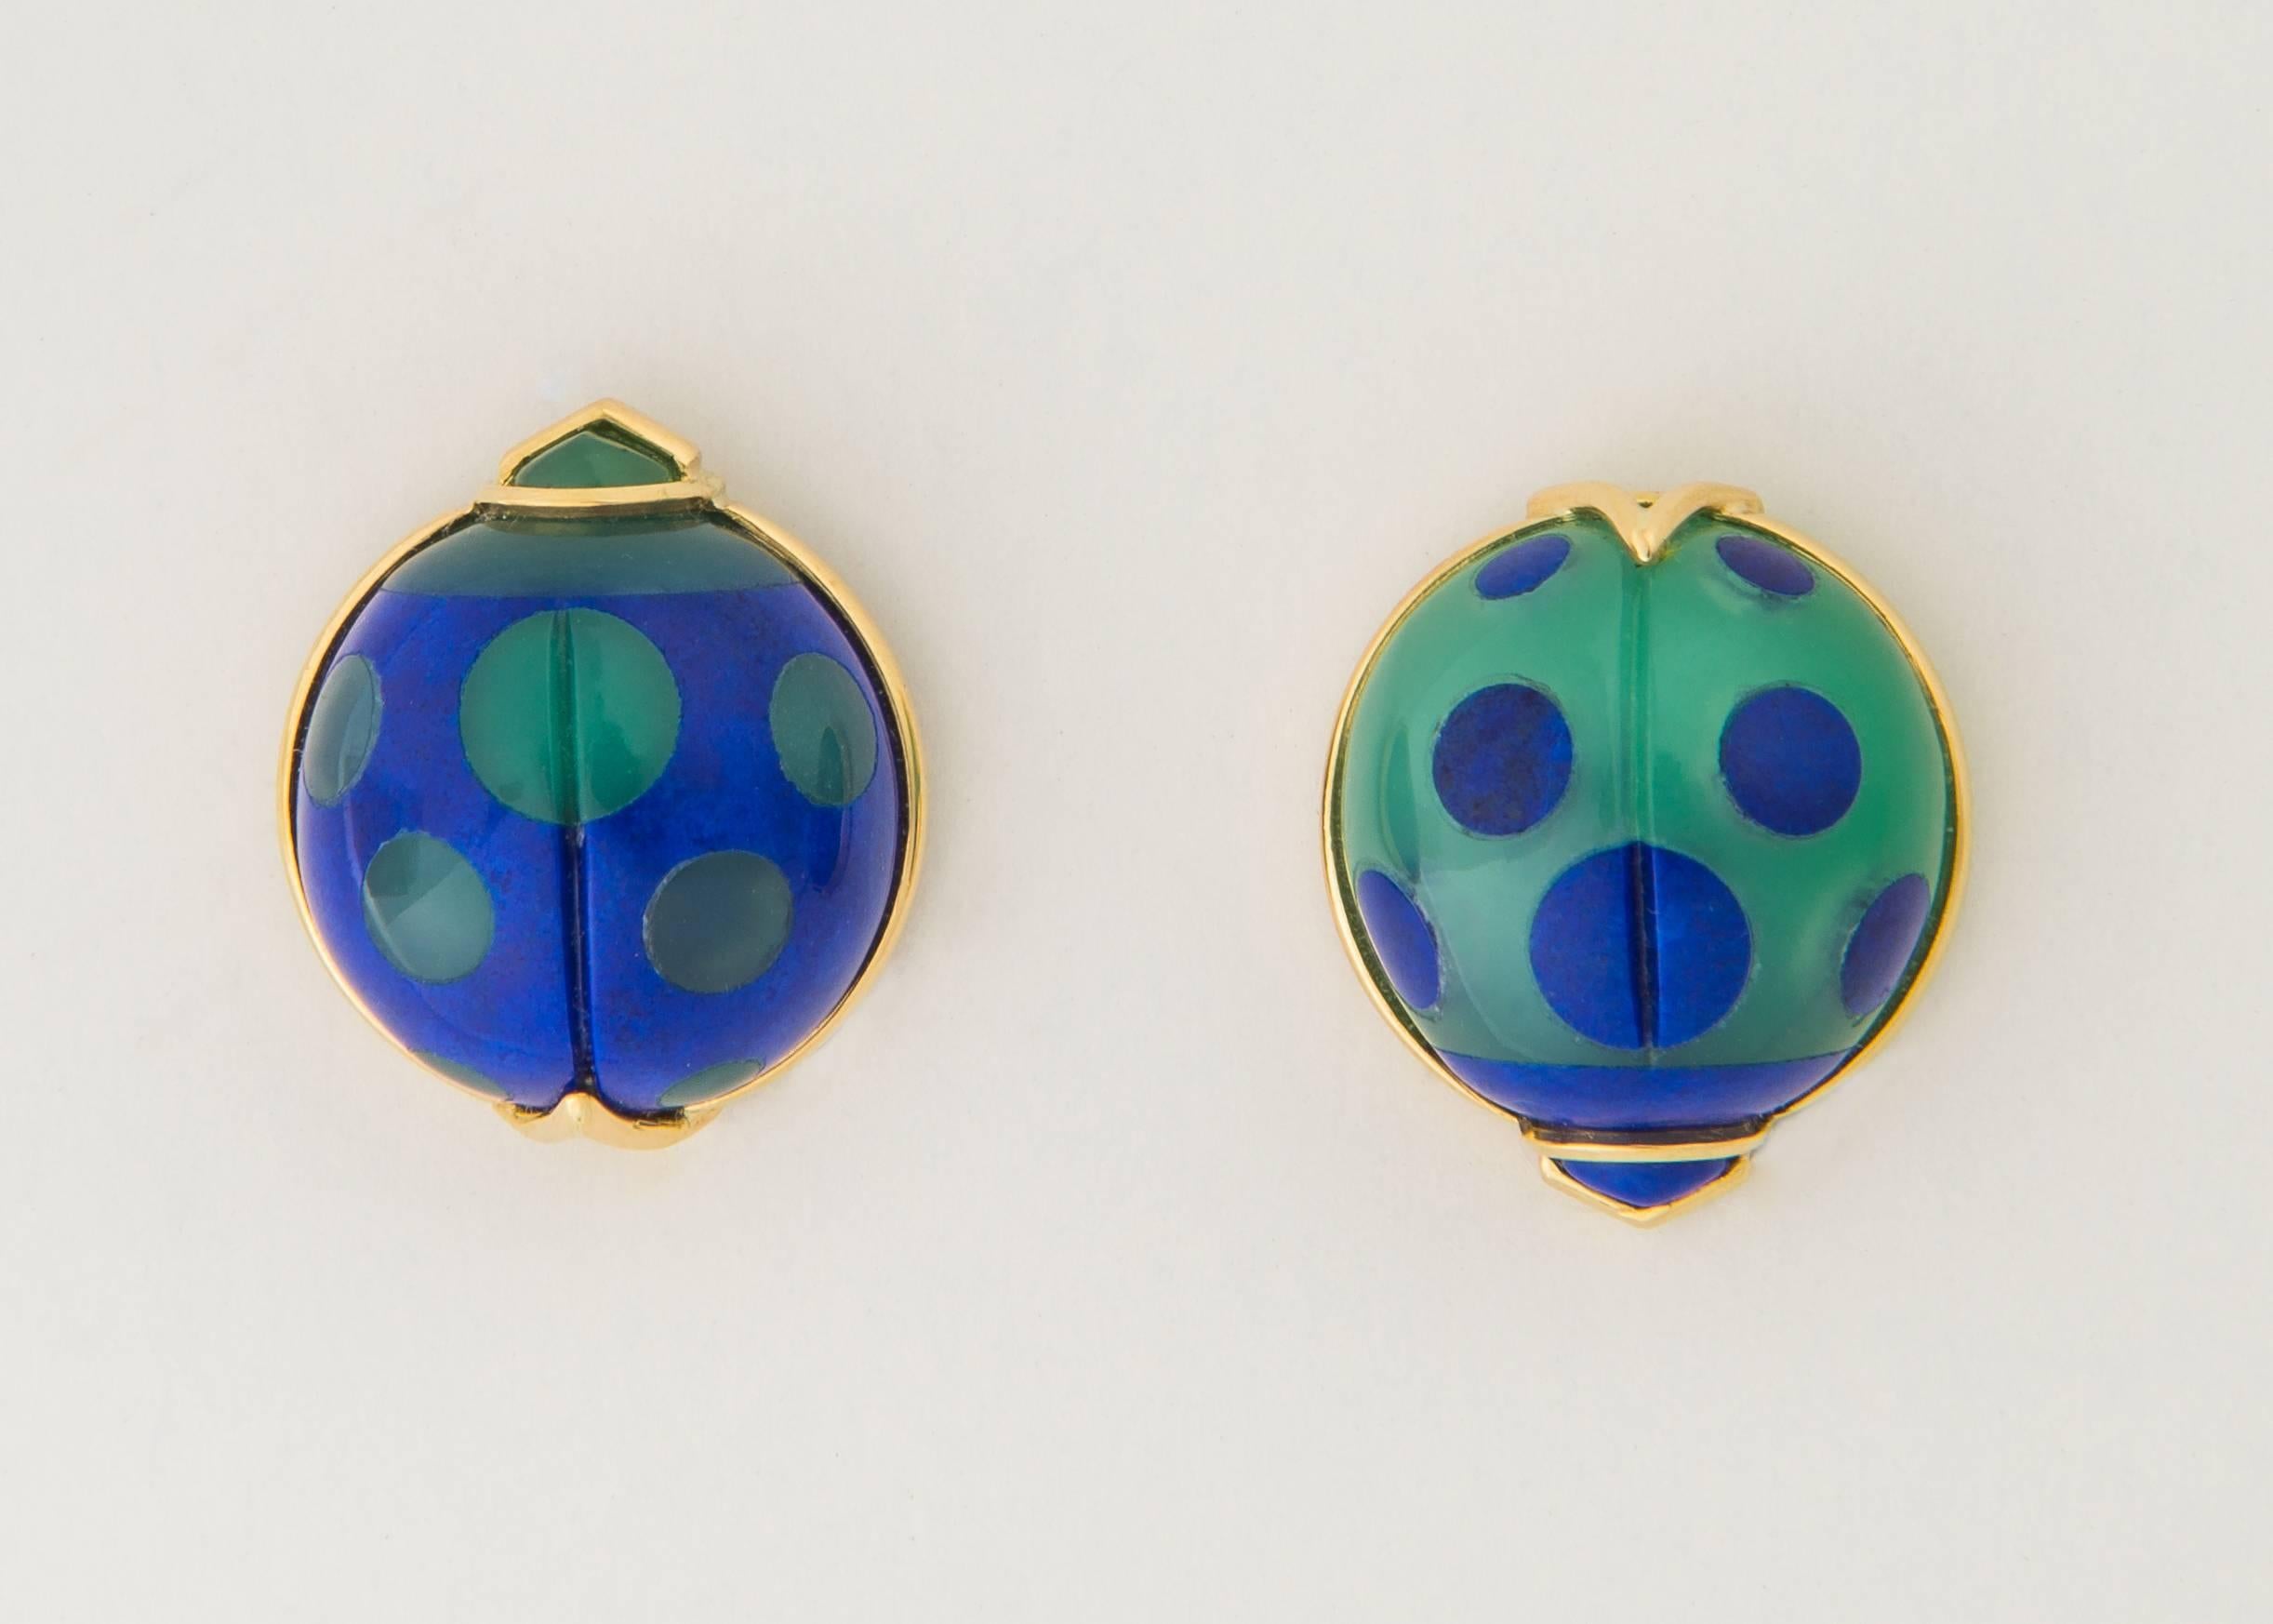 Simply Adorable !!! Lapis and chrysoprase are a perfect color combination for these playful chic lady bug earrings. These completely handmade earrings measure 3/4's of an inch.